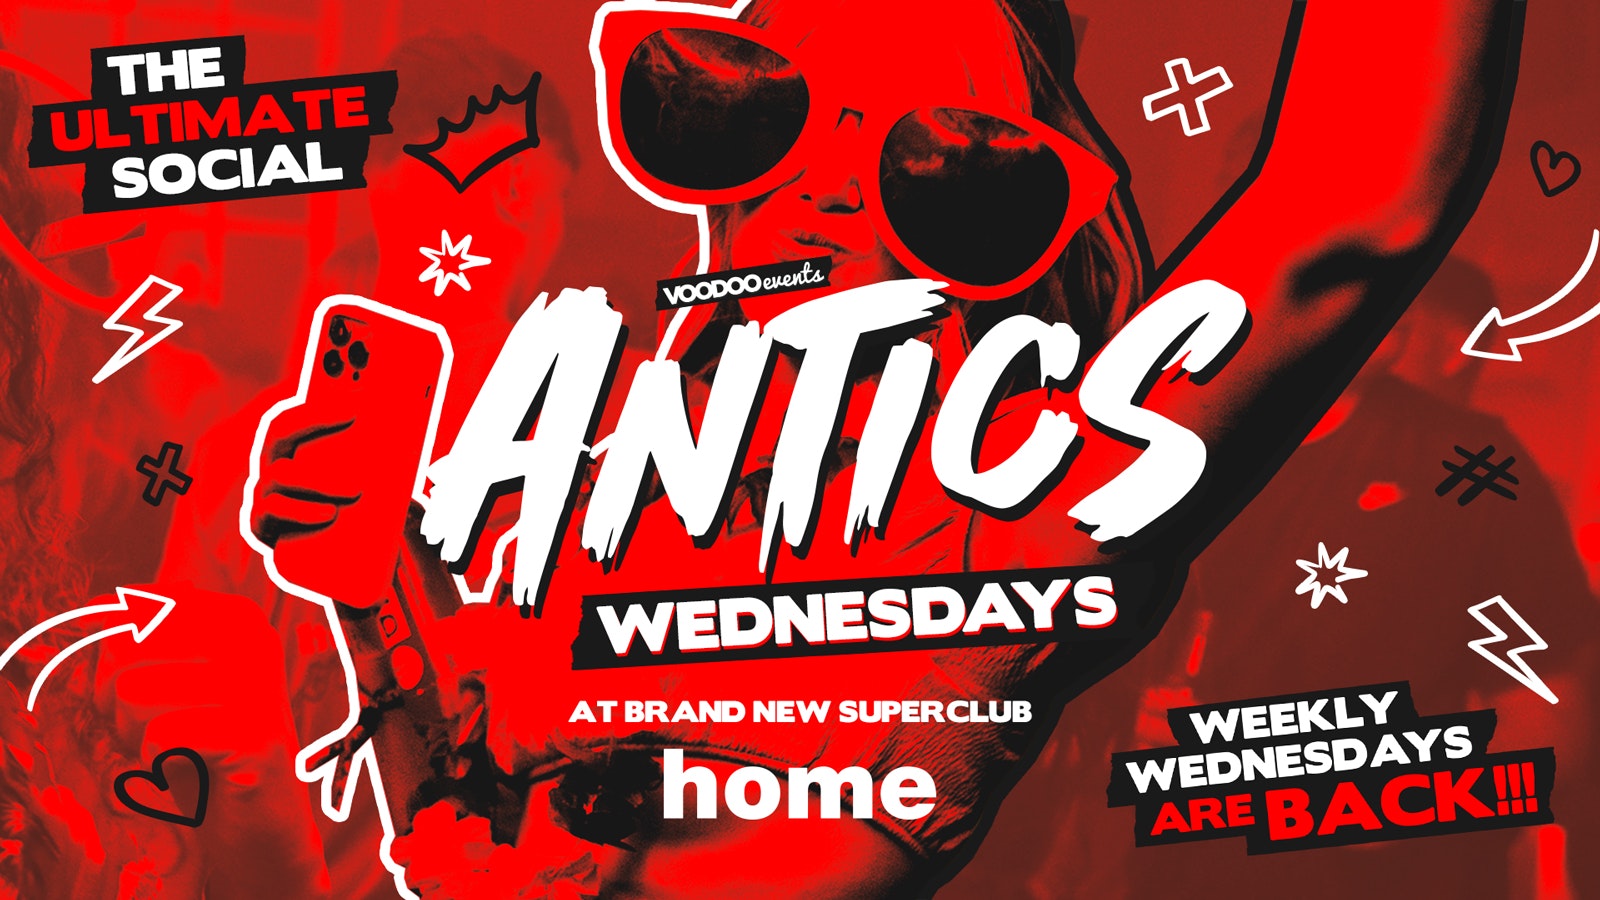 Antics @ THE BRAND NEW SUPER CLUB HOME – VIP LAUNCH – Wednesday 3rd April